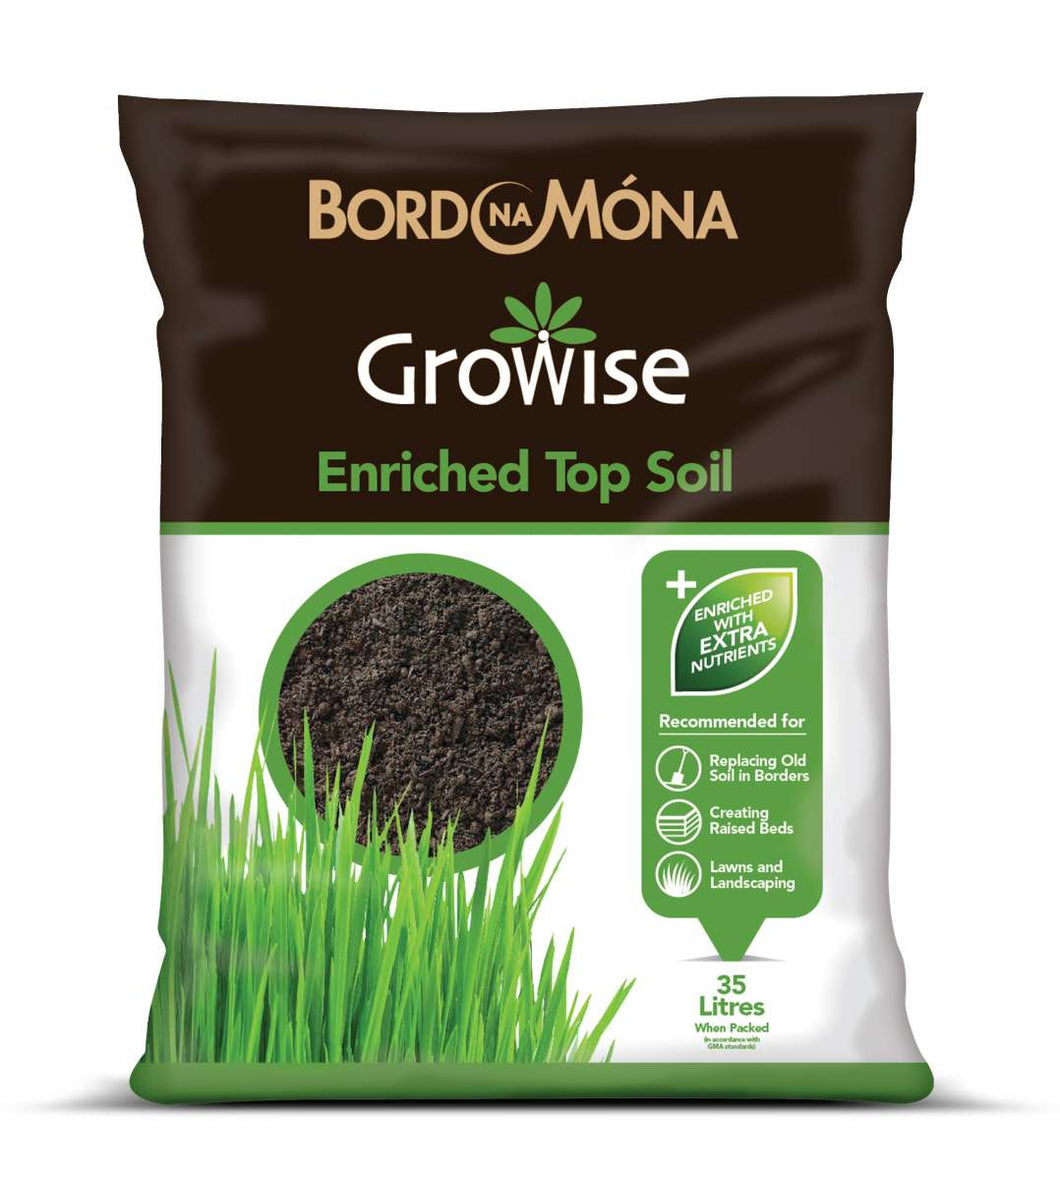 BNM GROWISE ENRICHED TOP SOIL 35L 2 for ?10